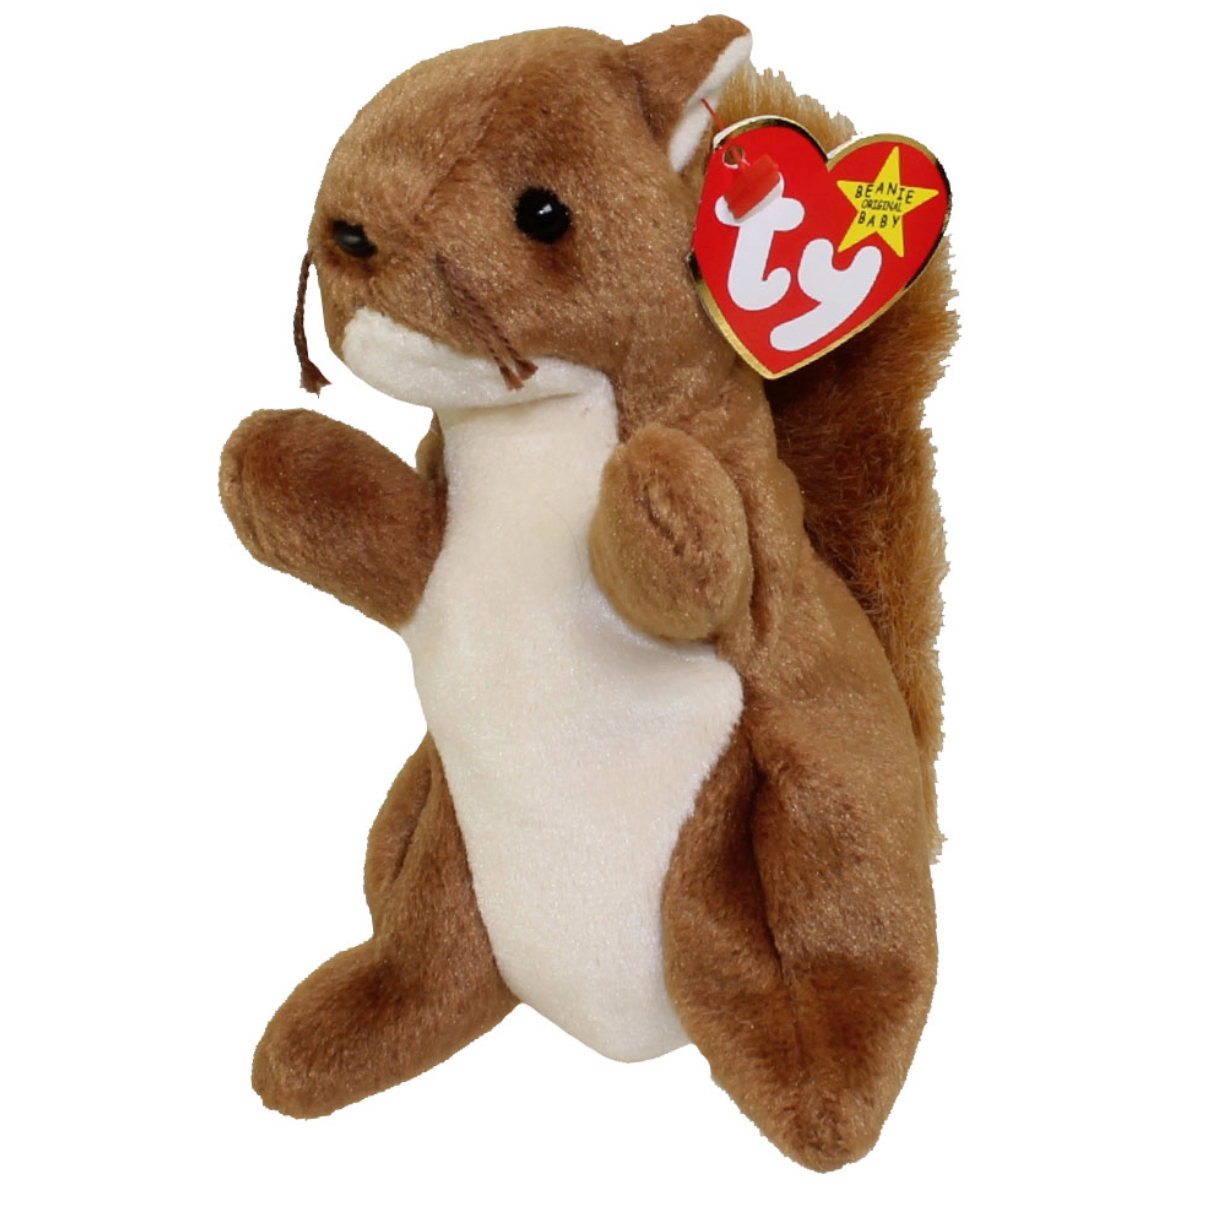 Beanie Baby: Nuts the Squirrel